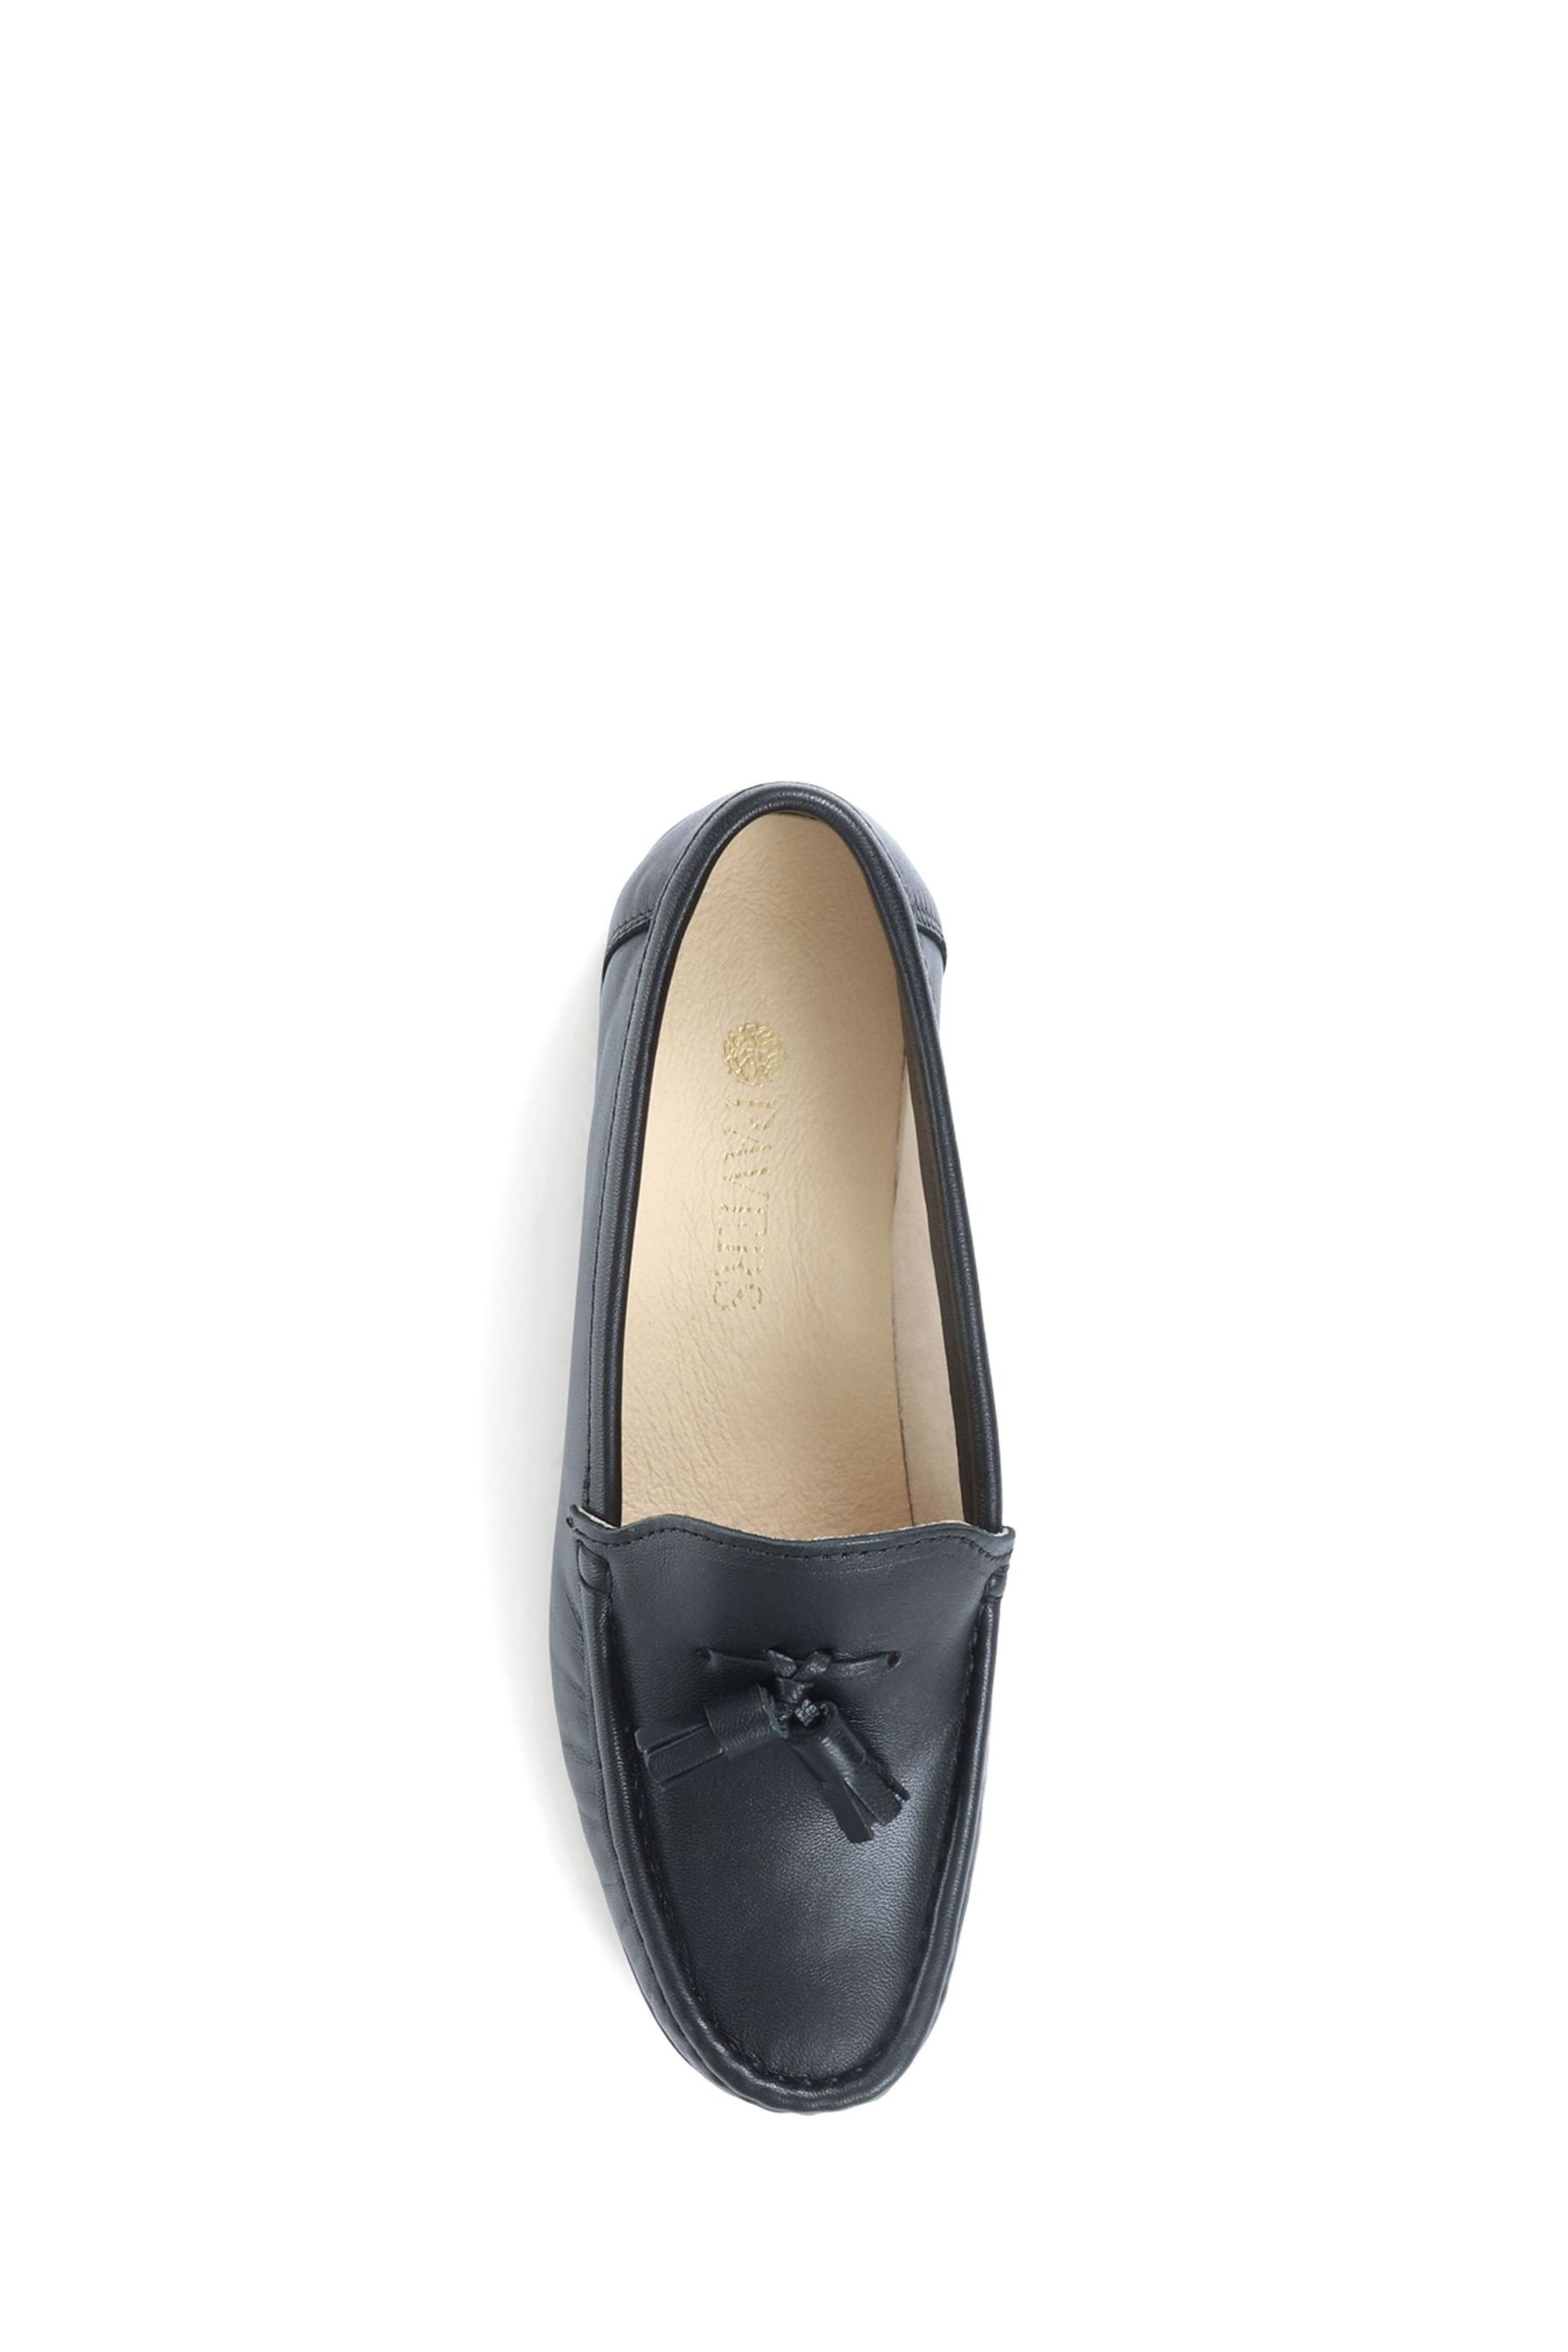 Pavers Wide Fit Black Leather Loafers With Tassel - Image 4 of 5